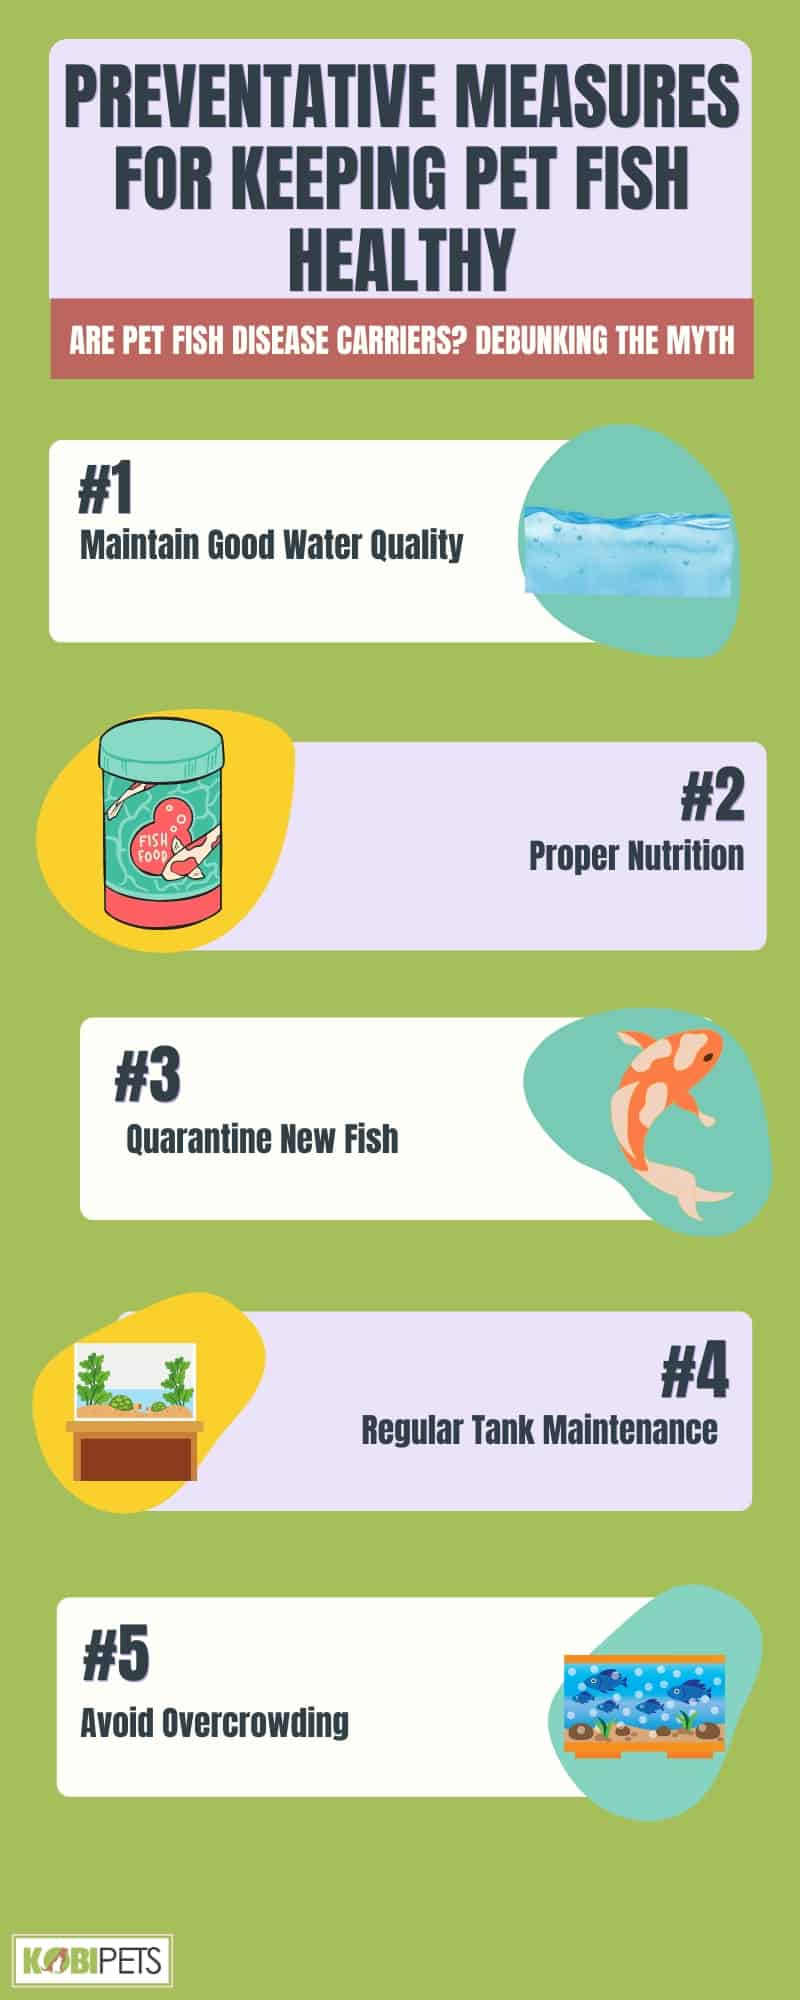 Preventative Measures for Keeping Pet Fish Healthy